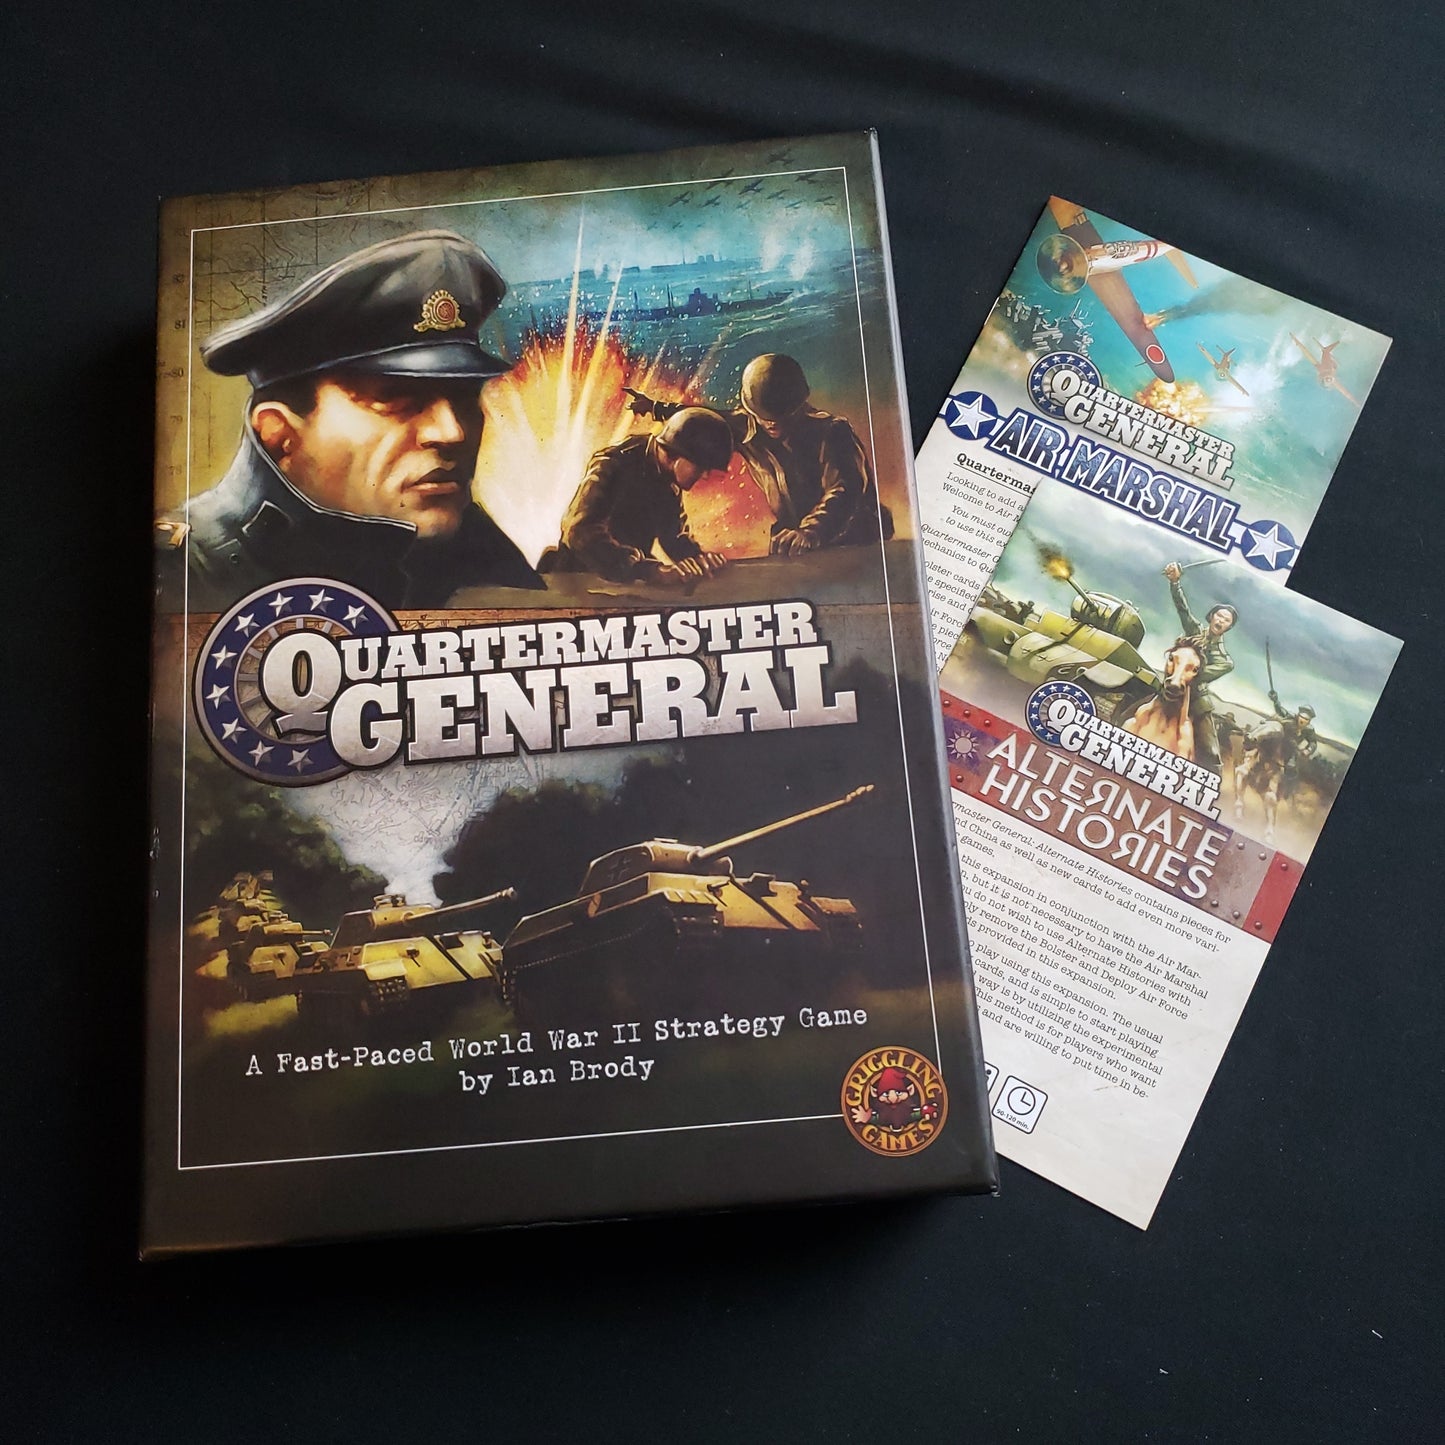 Image shows the front cover of the box of the Quartermaster General board game, with the instructions for the Air Marshal and Alternate Histories expansions tucked underneath the box